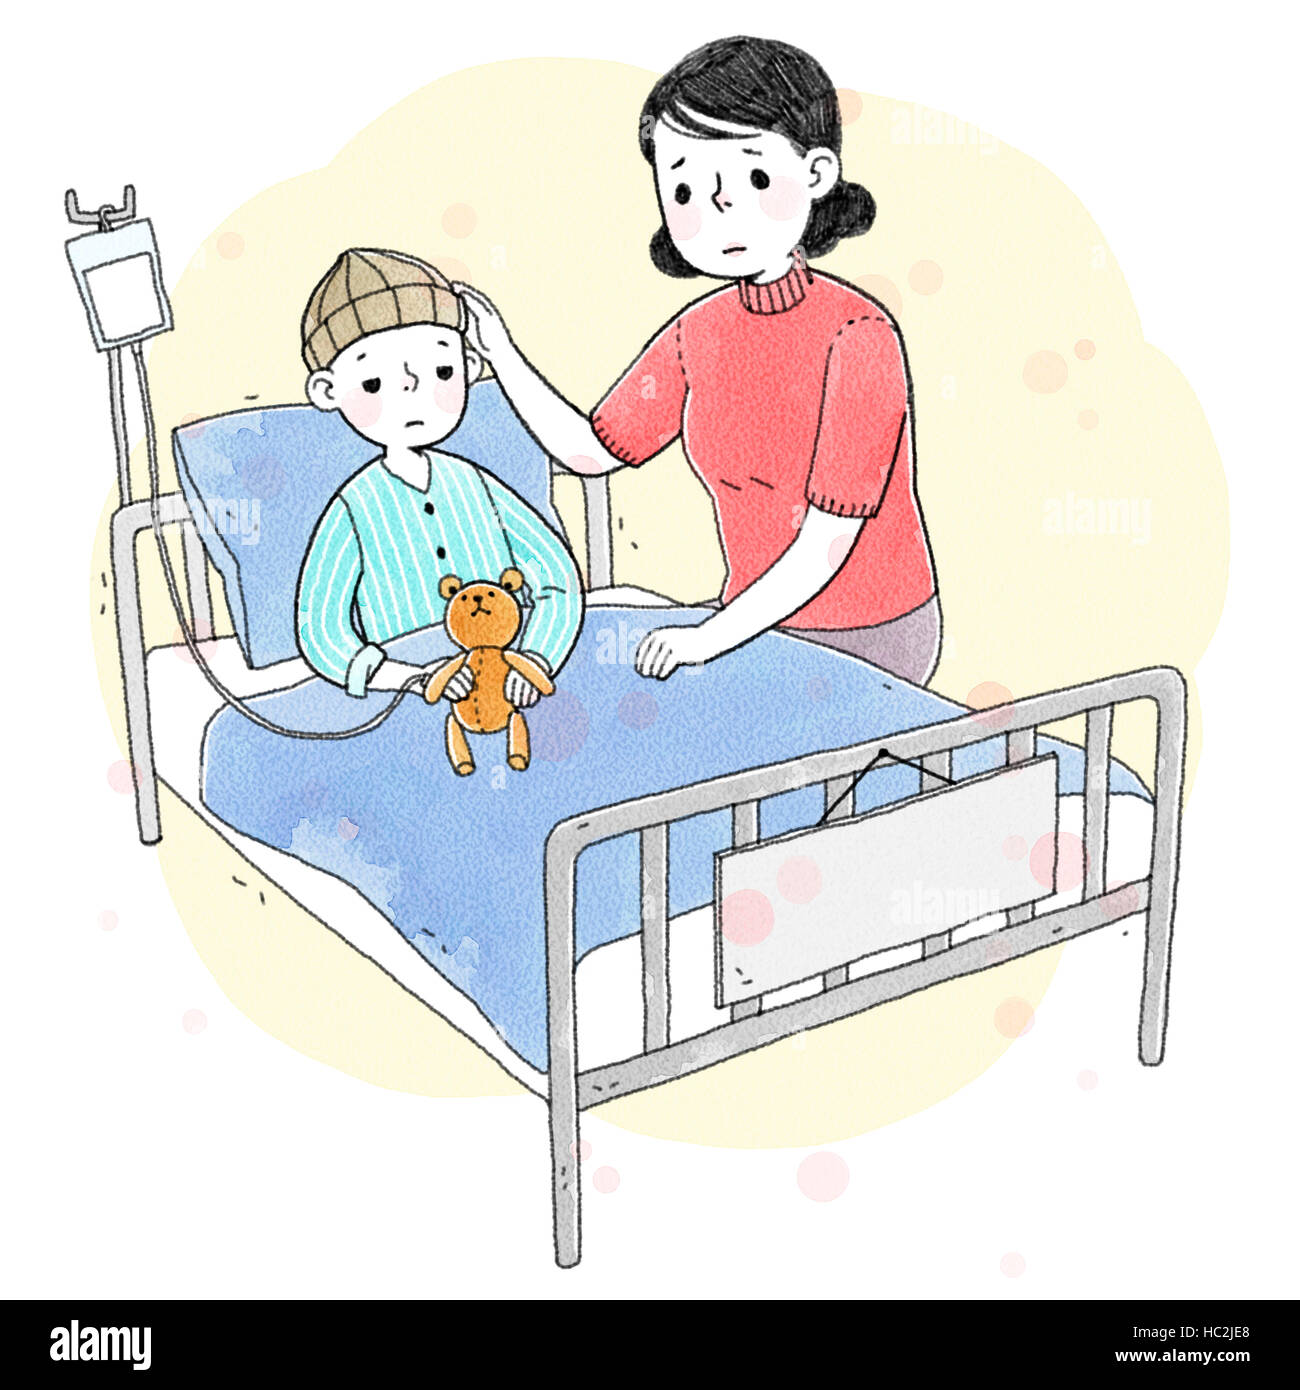 child in hospital bed drawing